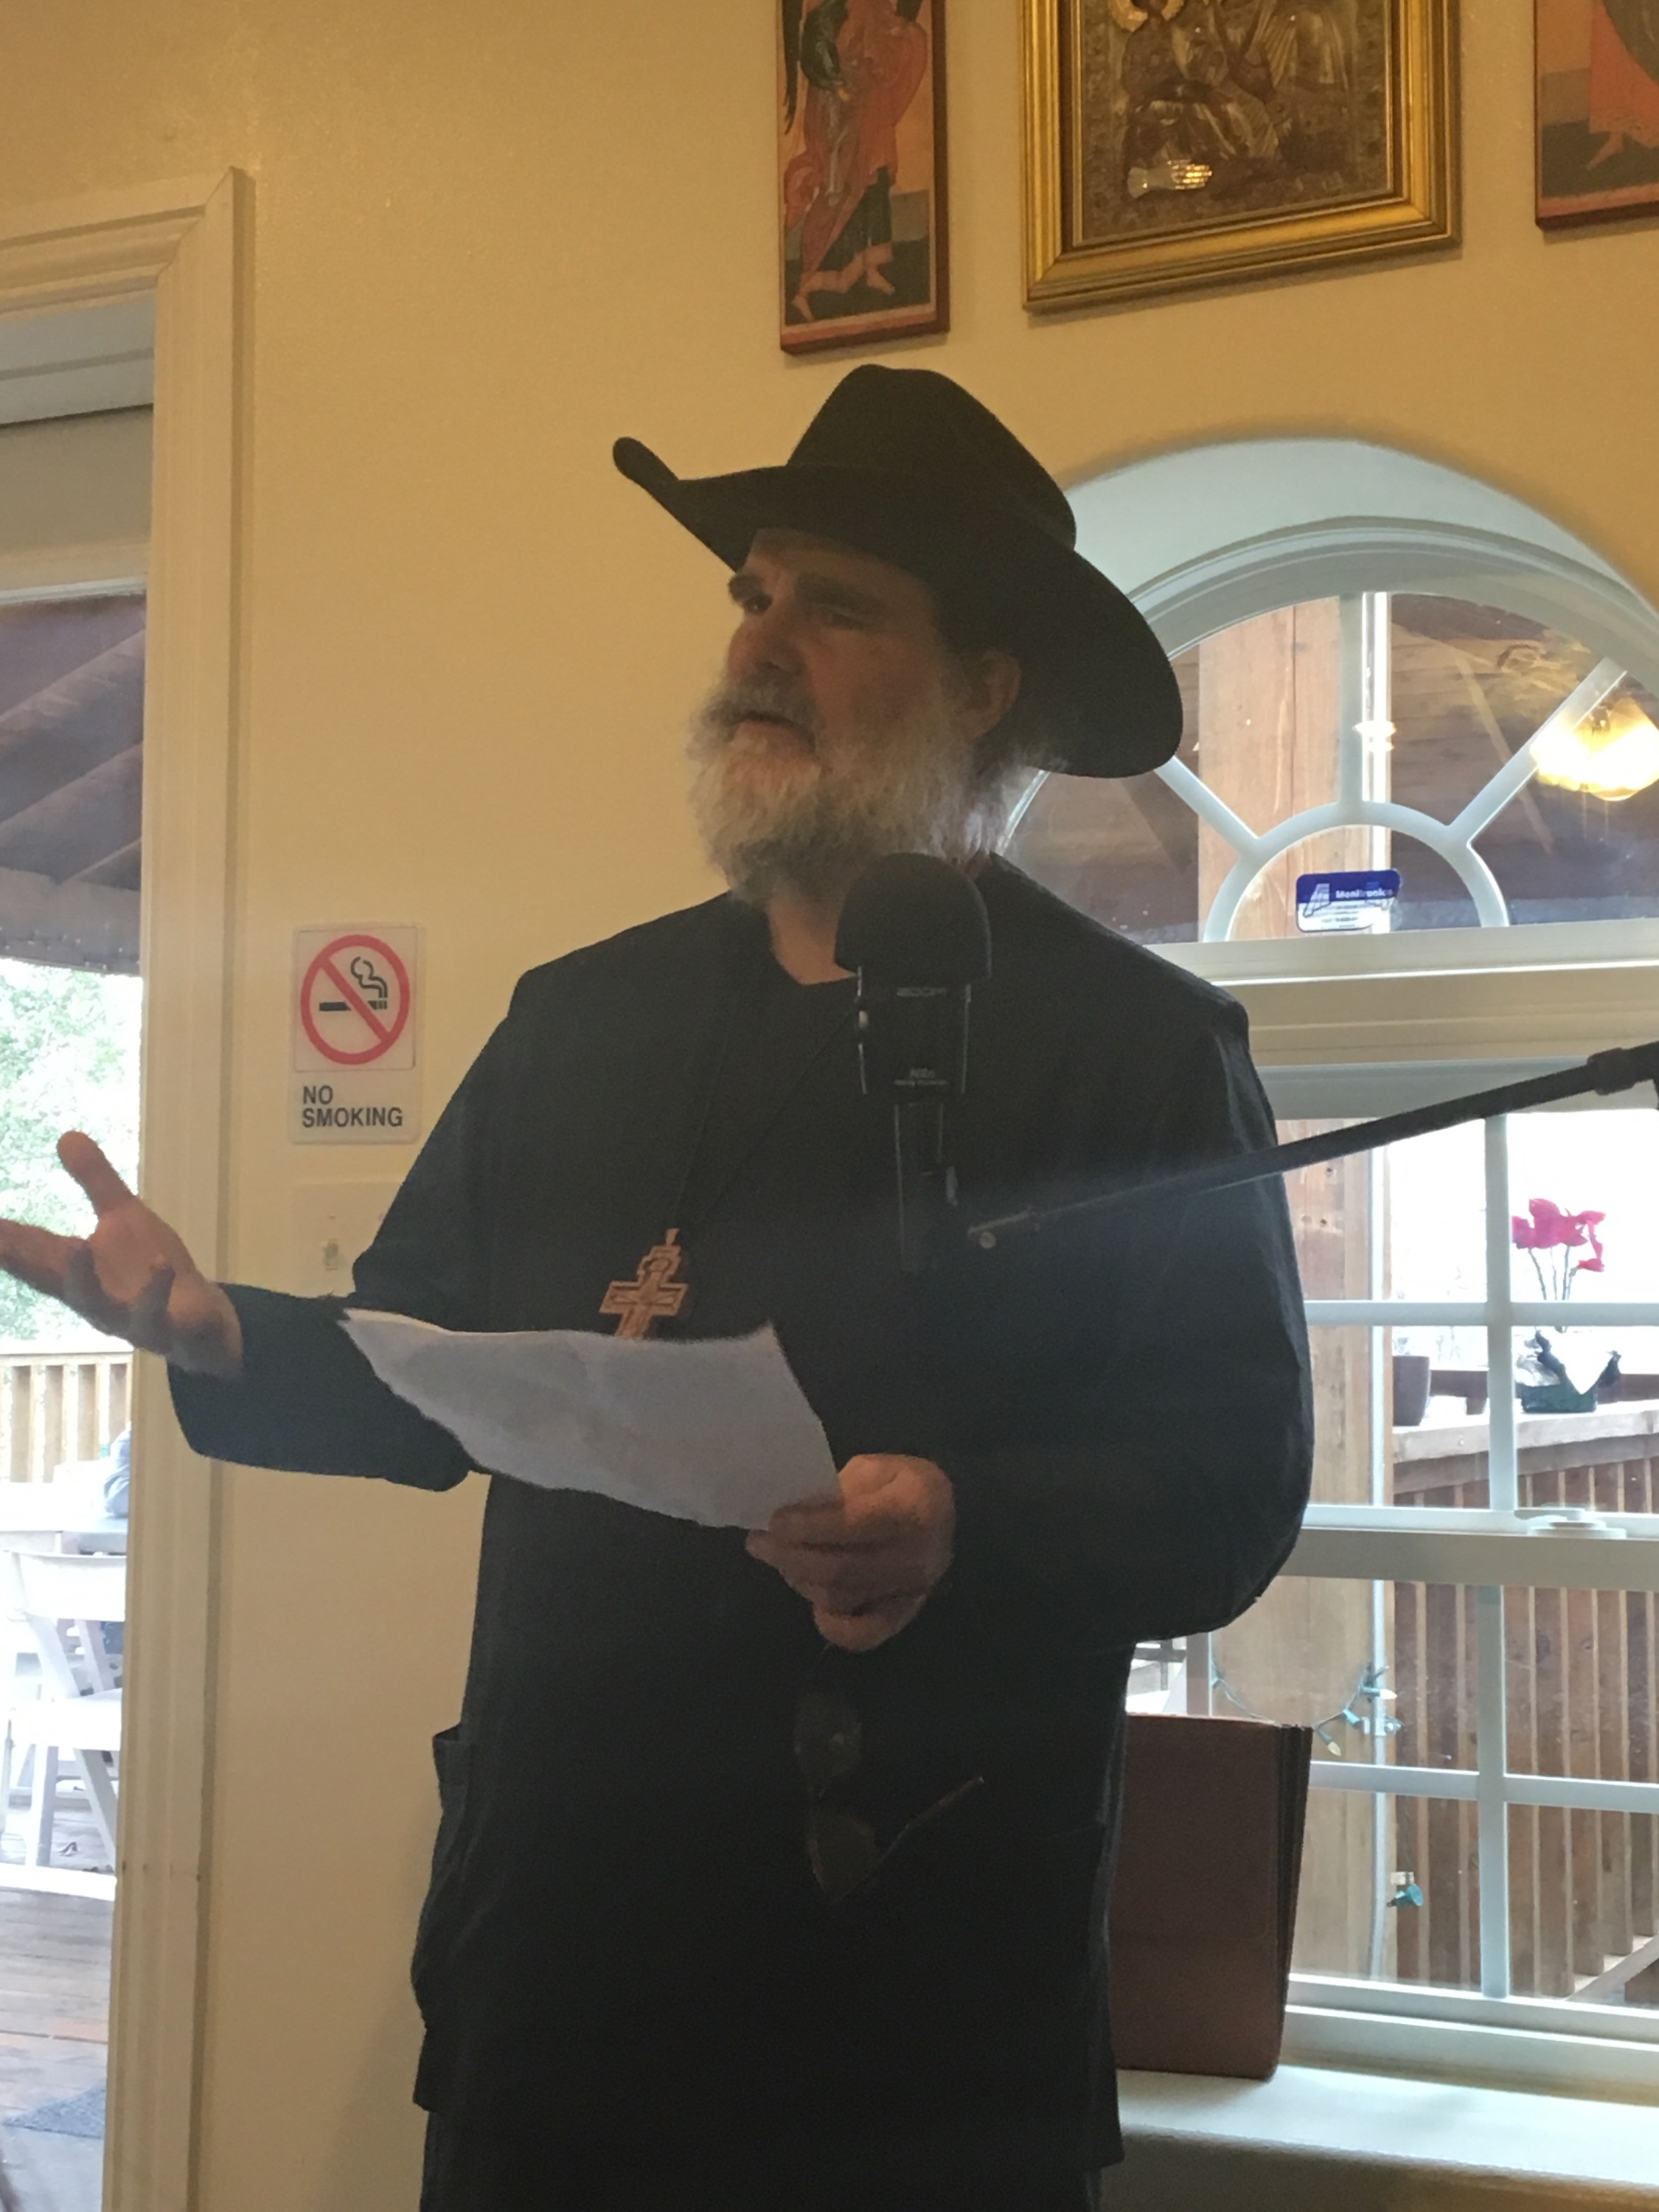 Priest Seraphim delivering opening remarks at the annual parish meeting, 2017 http://www.orthodox.net/photos/priest-seraphim-13-cowboy-hat-parish-meeting-2017.jpg